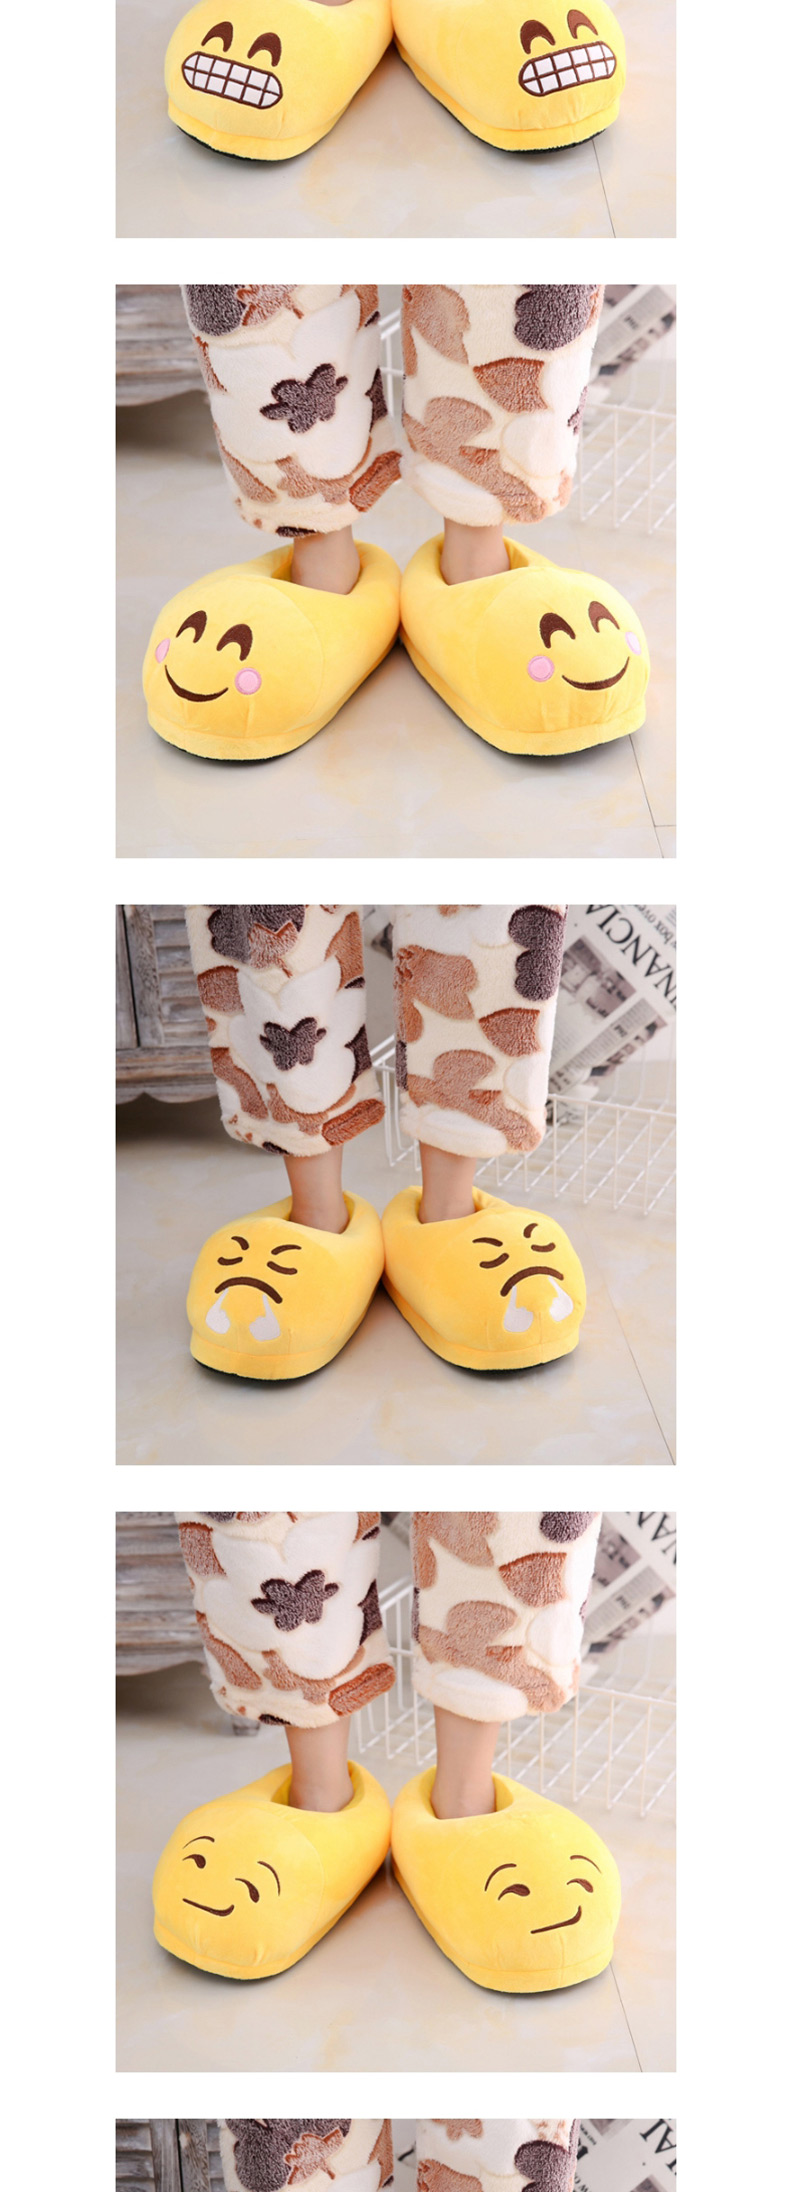 Fashion 14 Yellow Dollars Cartoon Expression Plush Bag With Cotton Slippers,Slippers